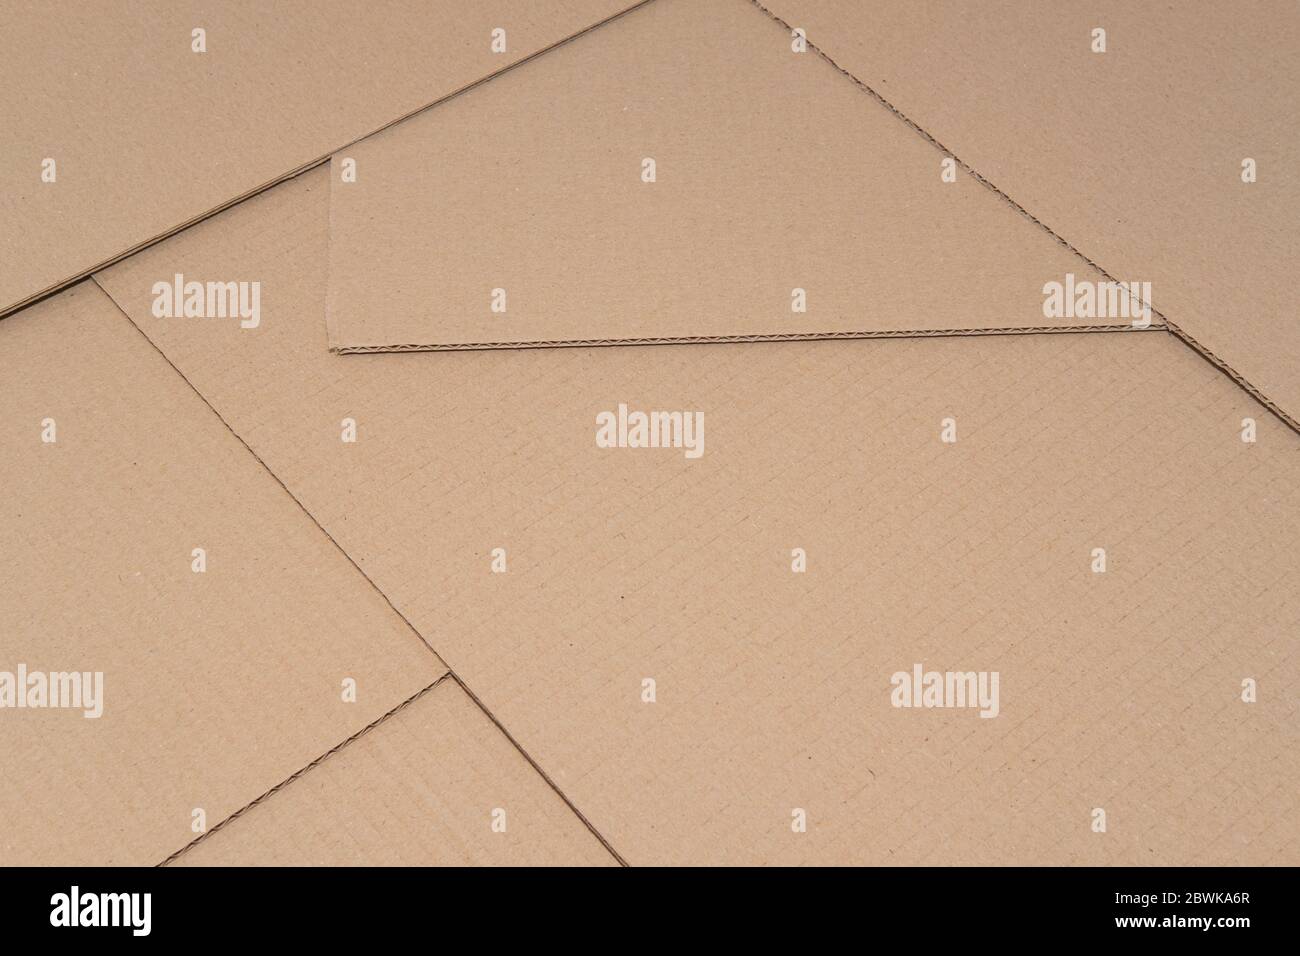 Cardboard paper backdrop, textured background. Natural packaging, brown recycled paper with text copy space Stock Photo